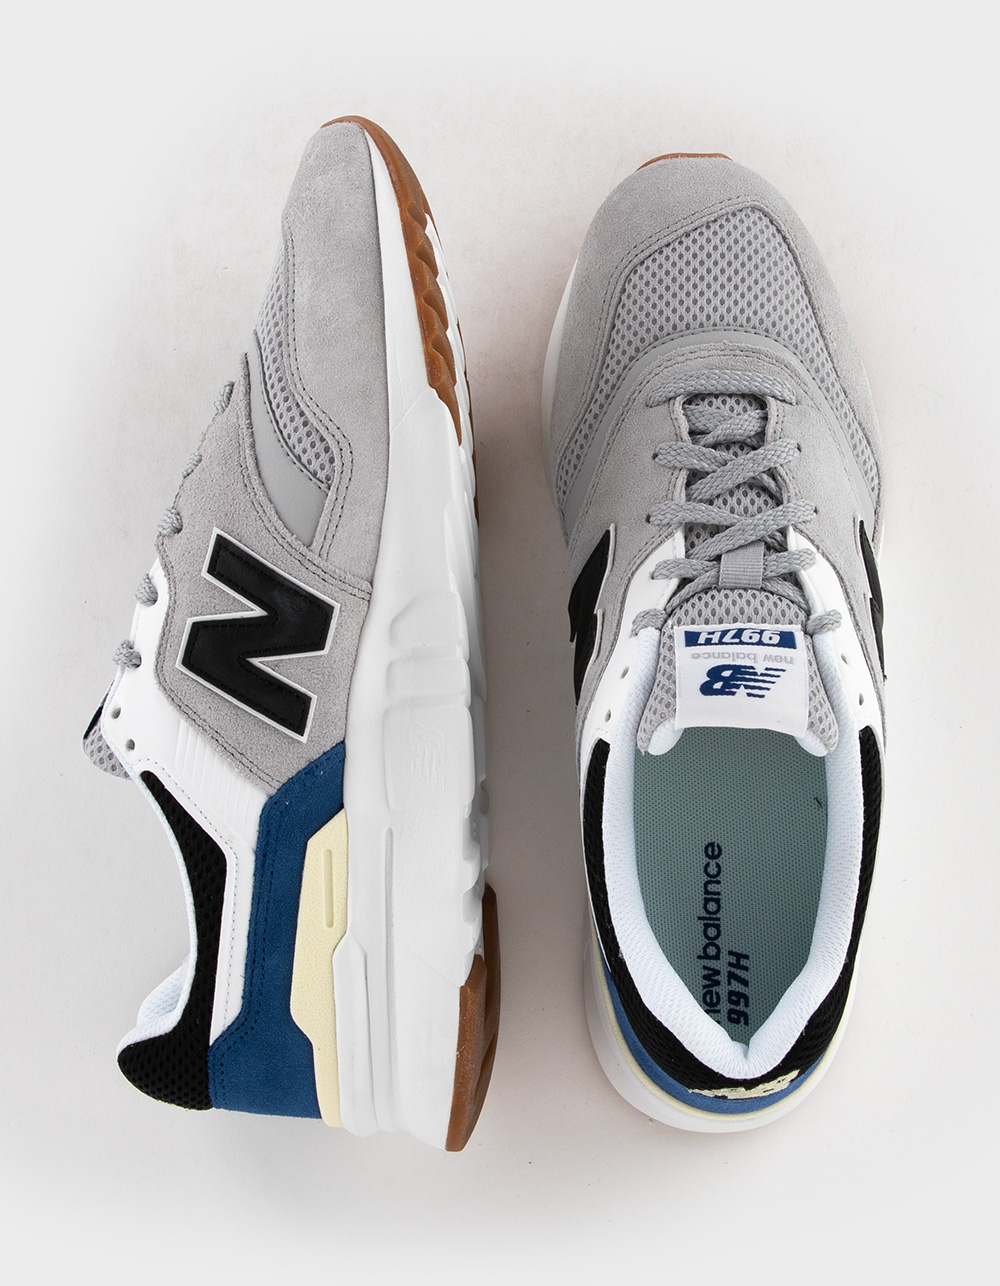 NEW BALANCE 997 Mens Shoes - GRY/NVY | Tillys